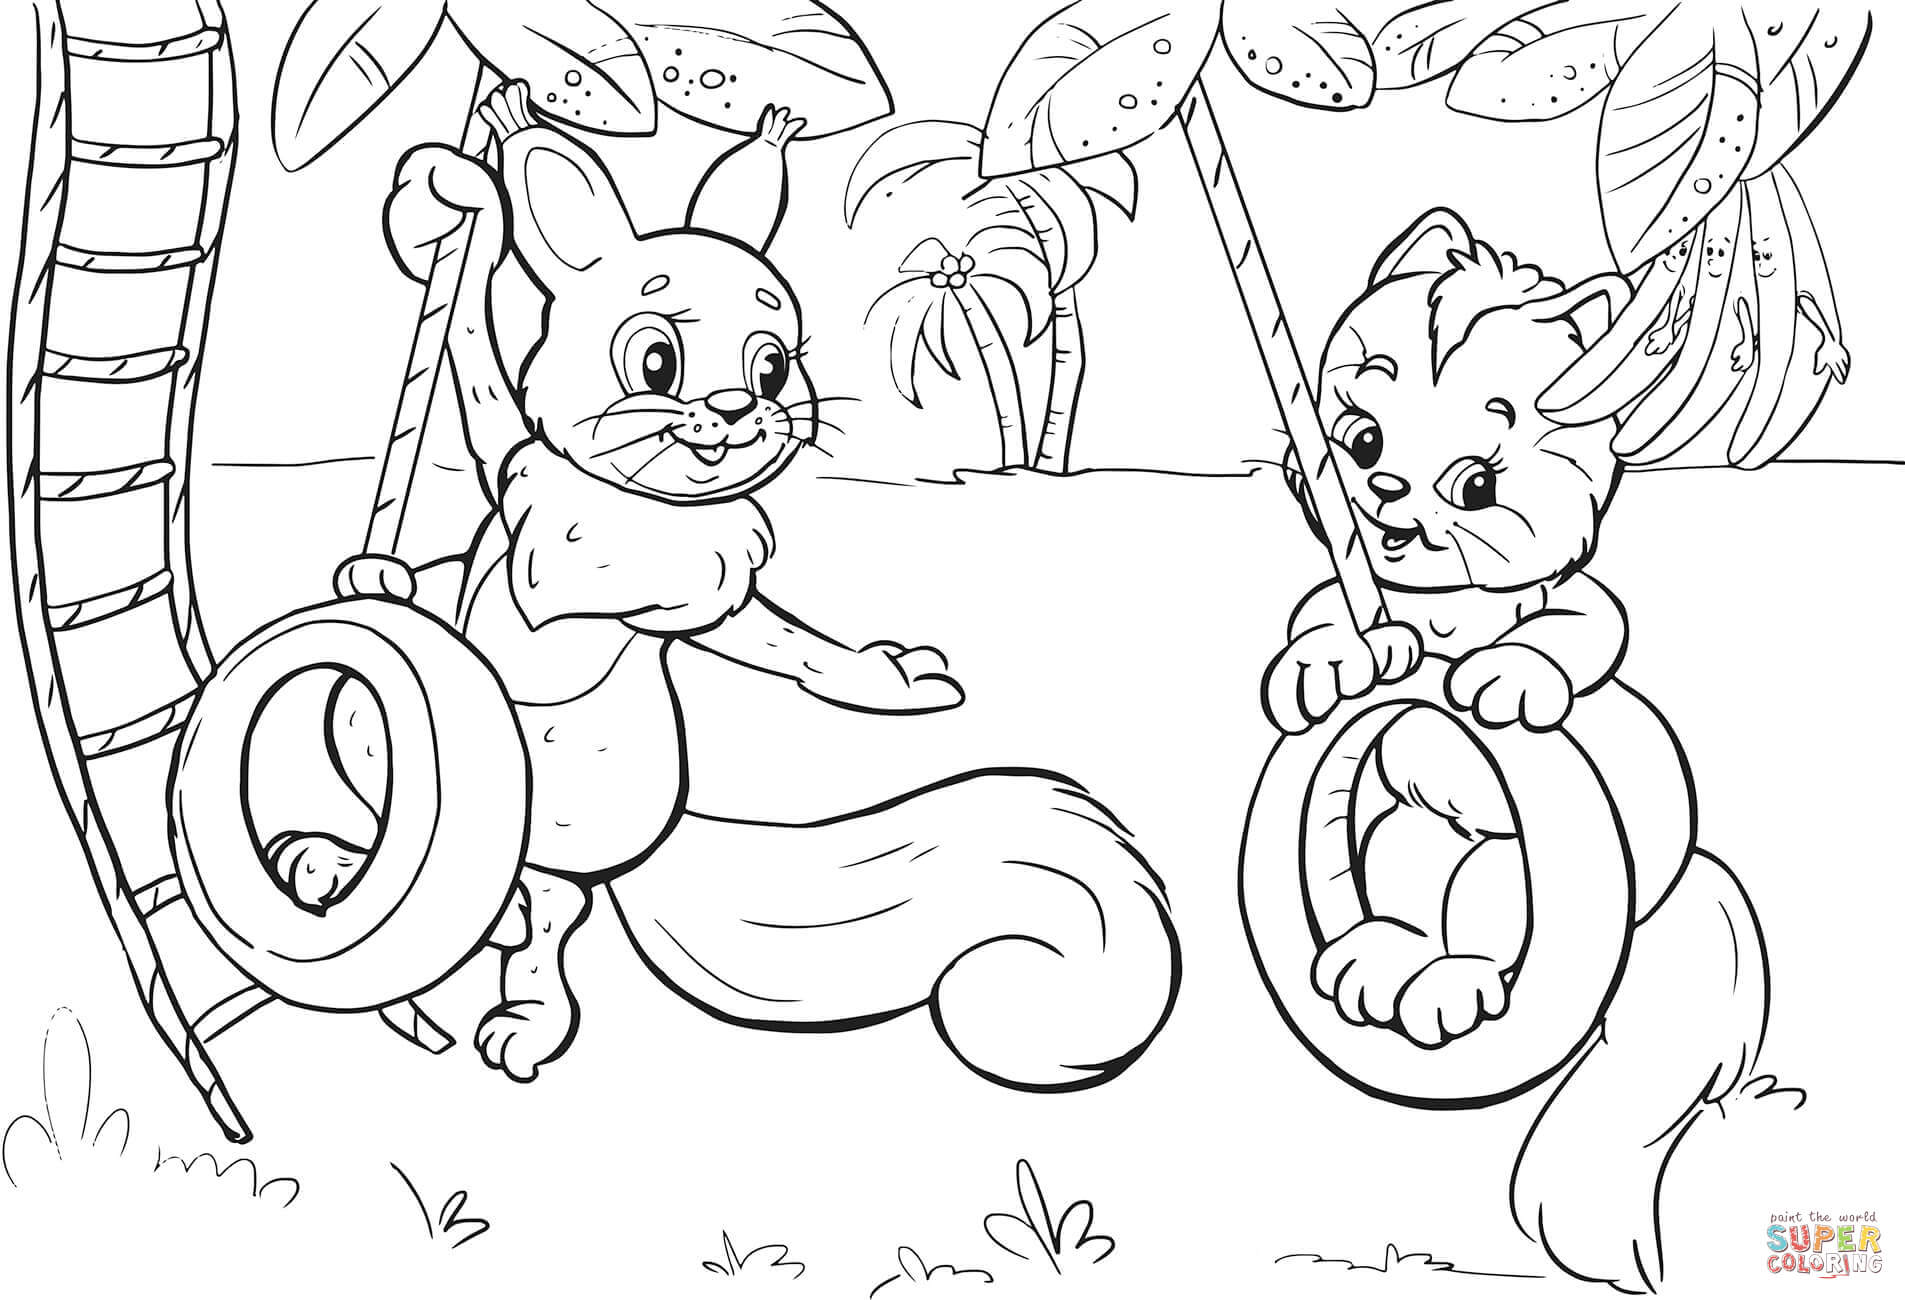 Tire Swing coloring #17, Download drawings